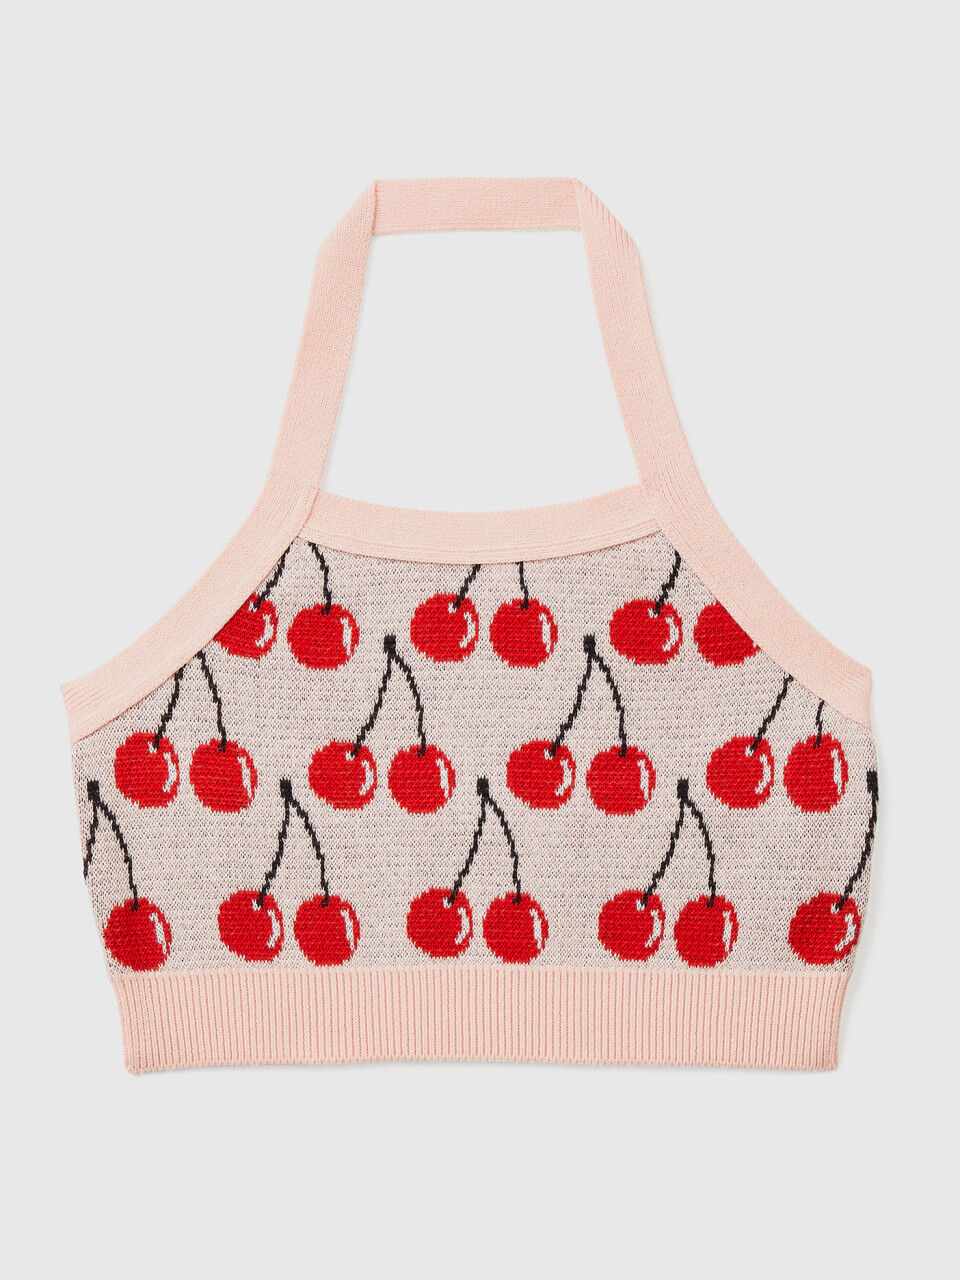 Pink crop top with cherry pattern